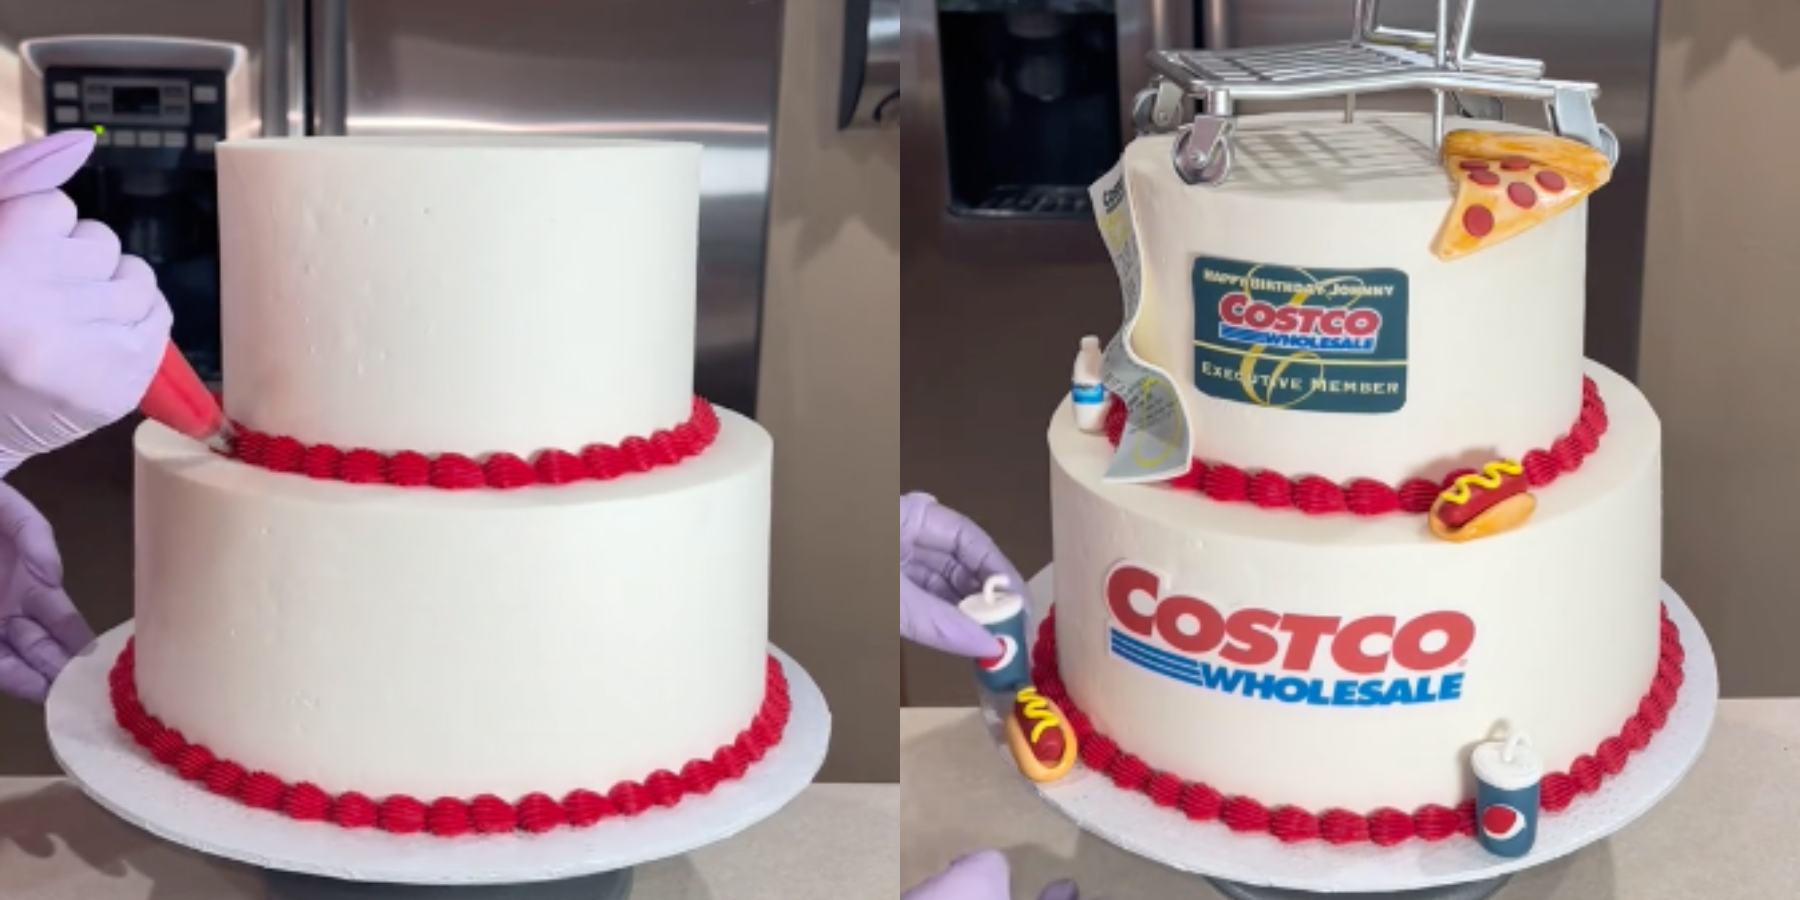 Is Costco still selling cakes in 2021? - Quora